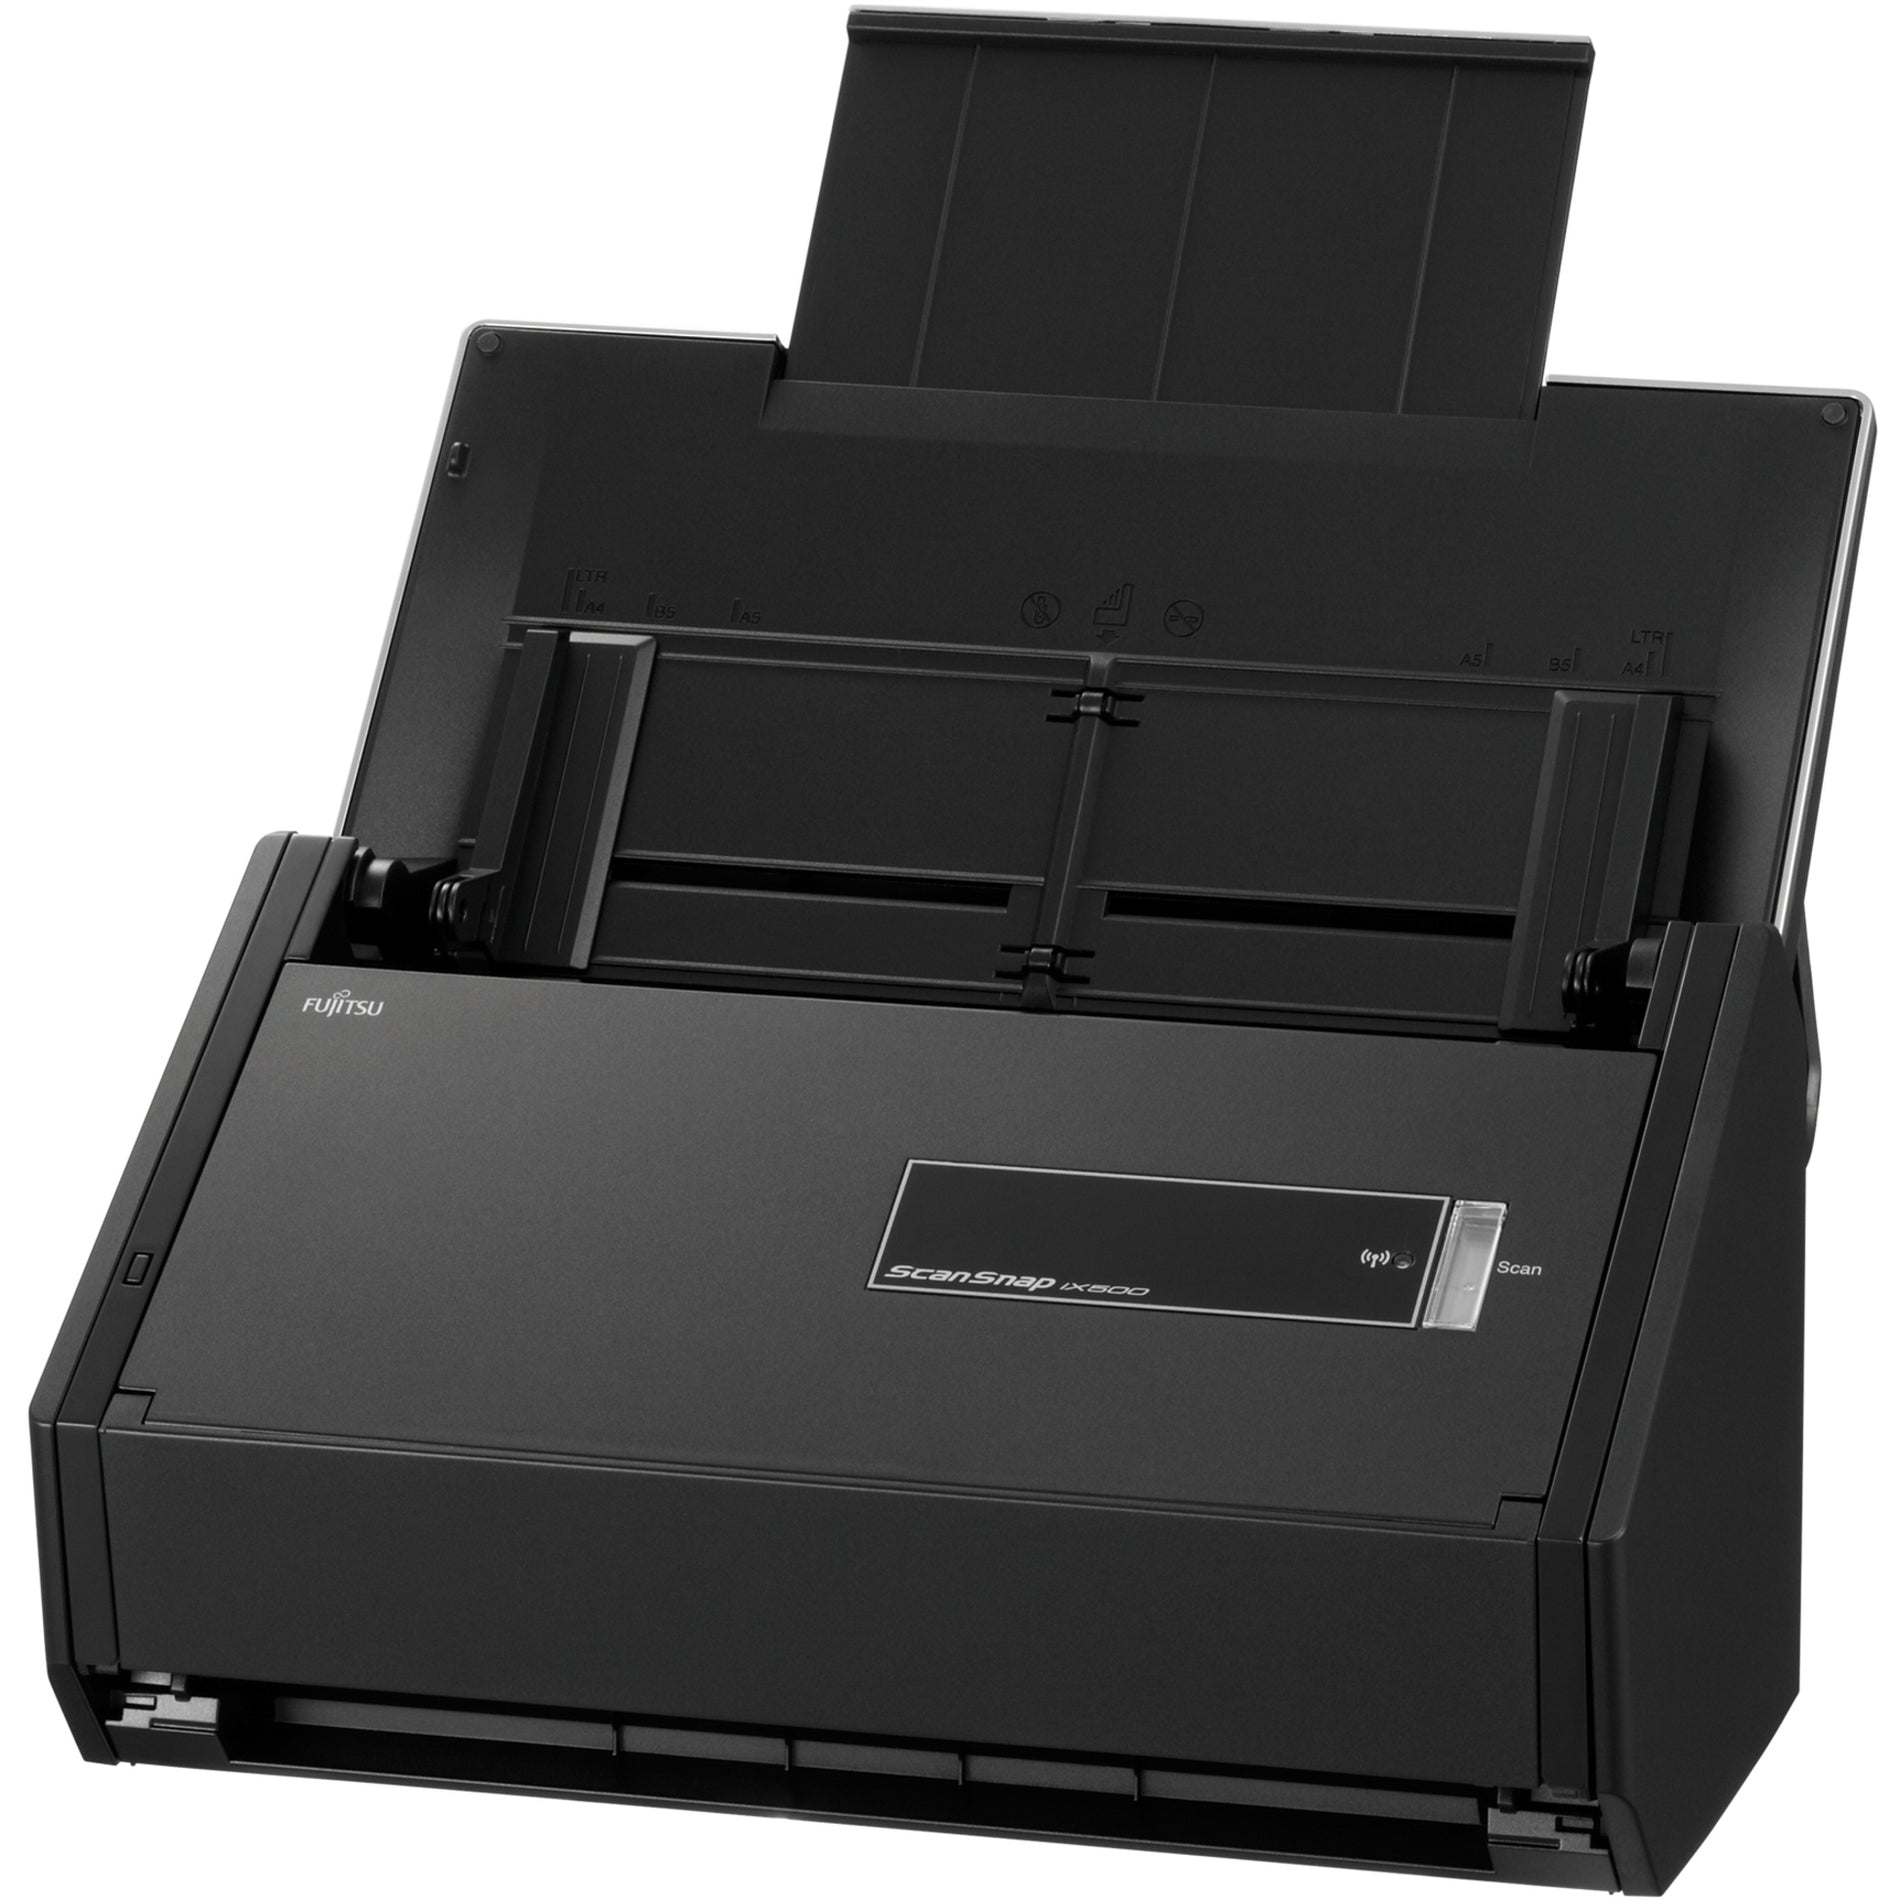 Fujitsu PA03656-B005 ScanSnap iX500 Desktop Scanner for PC and Mac, Fast and Efficient Document Scanning